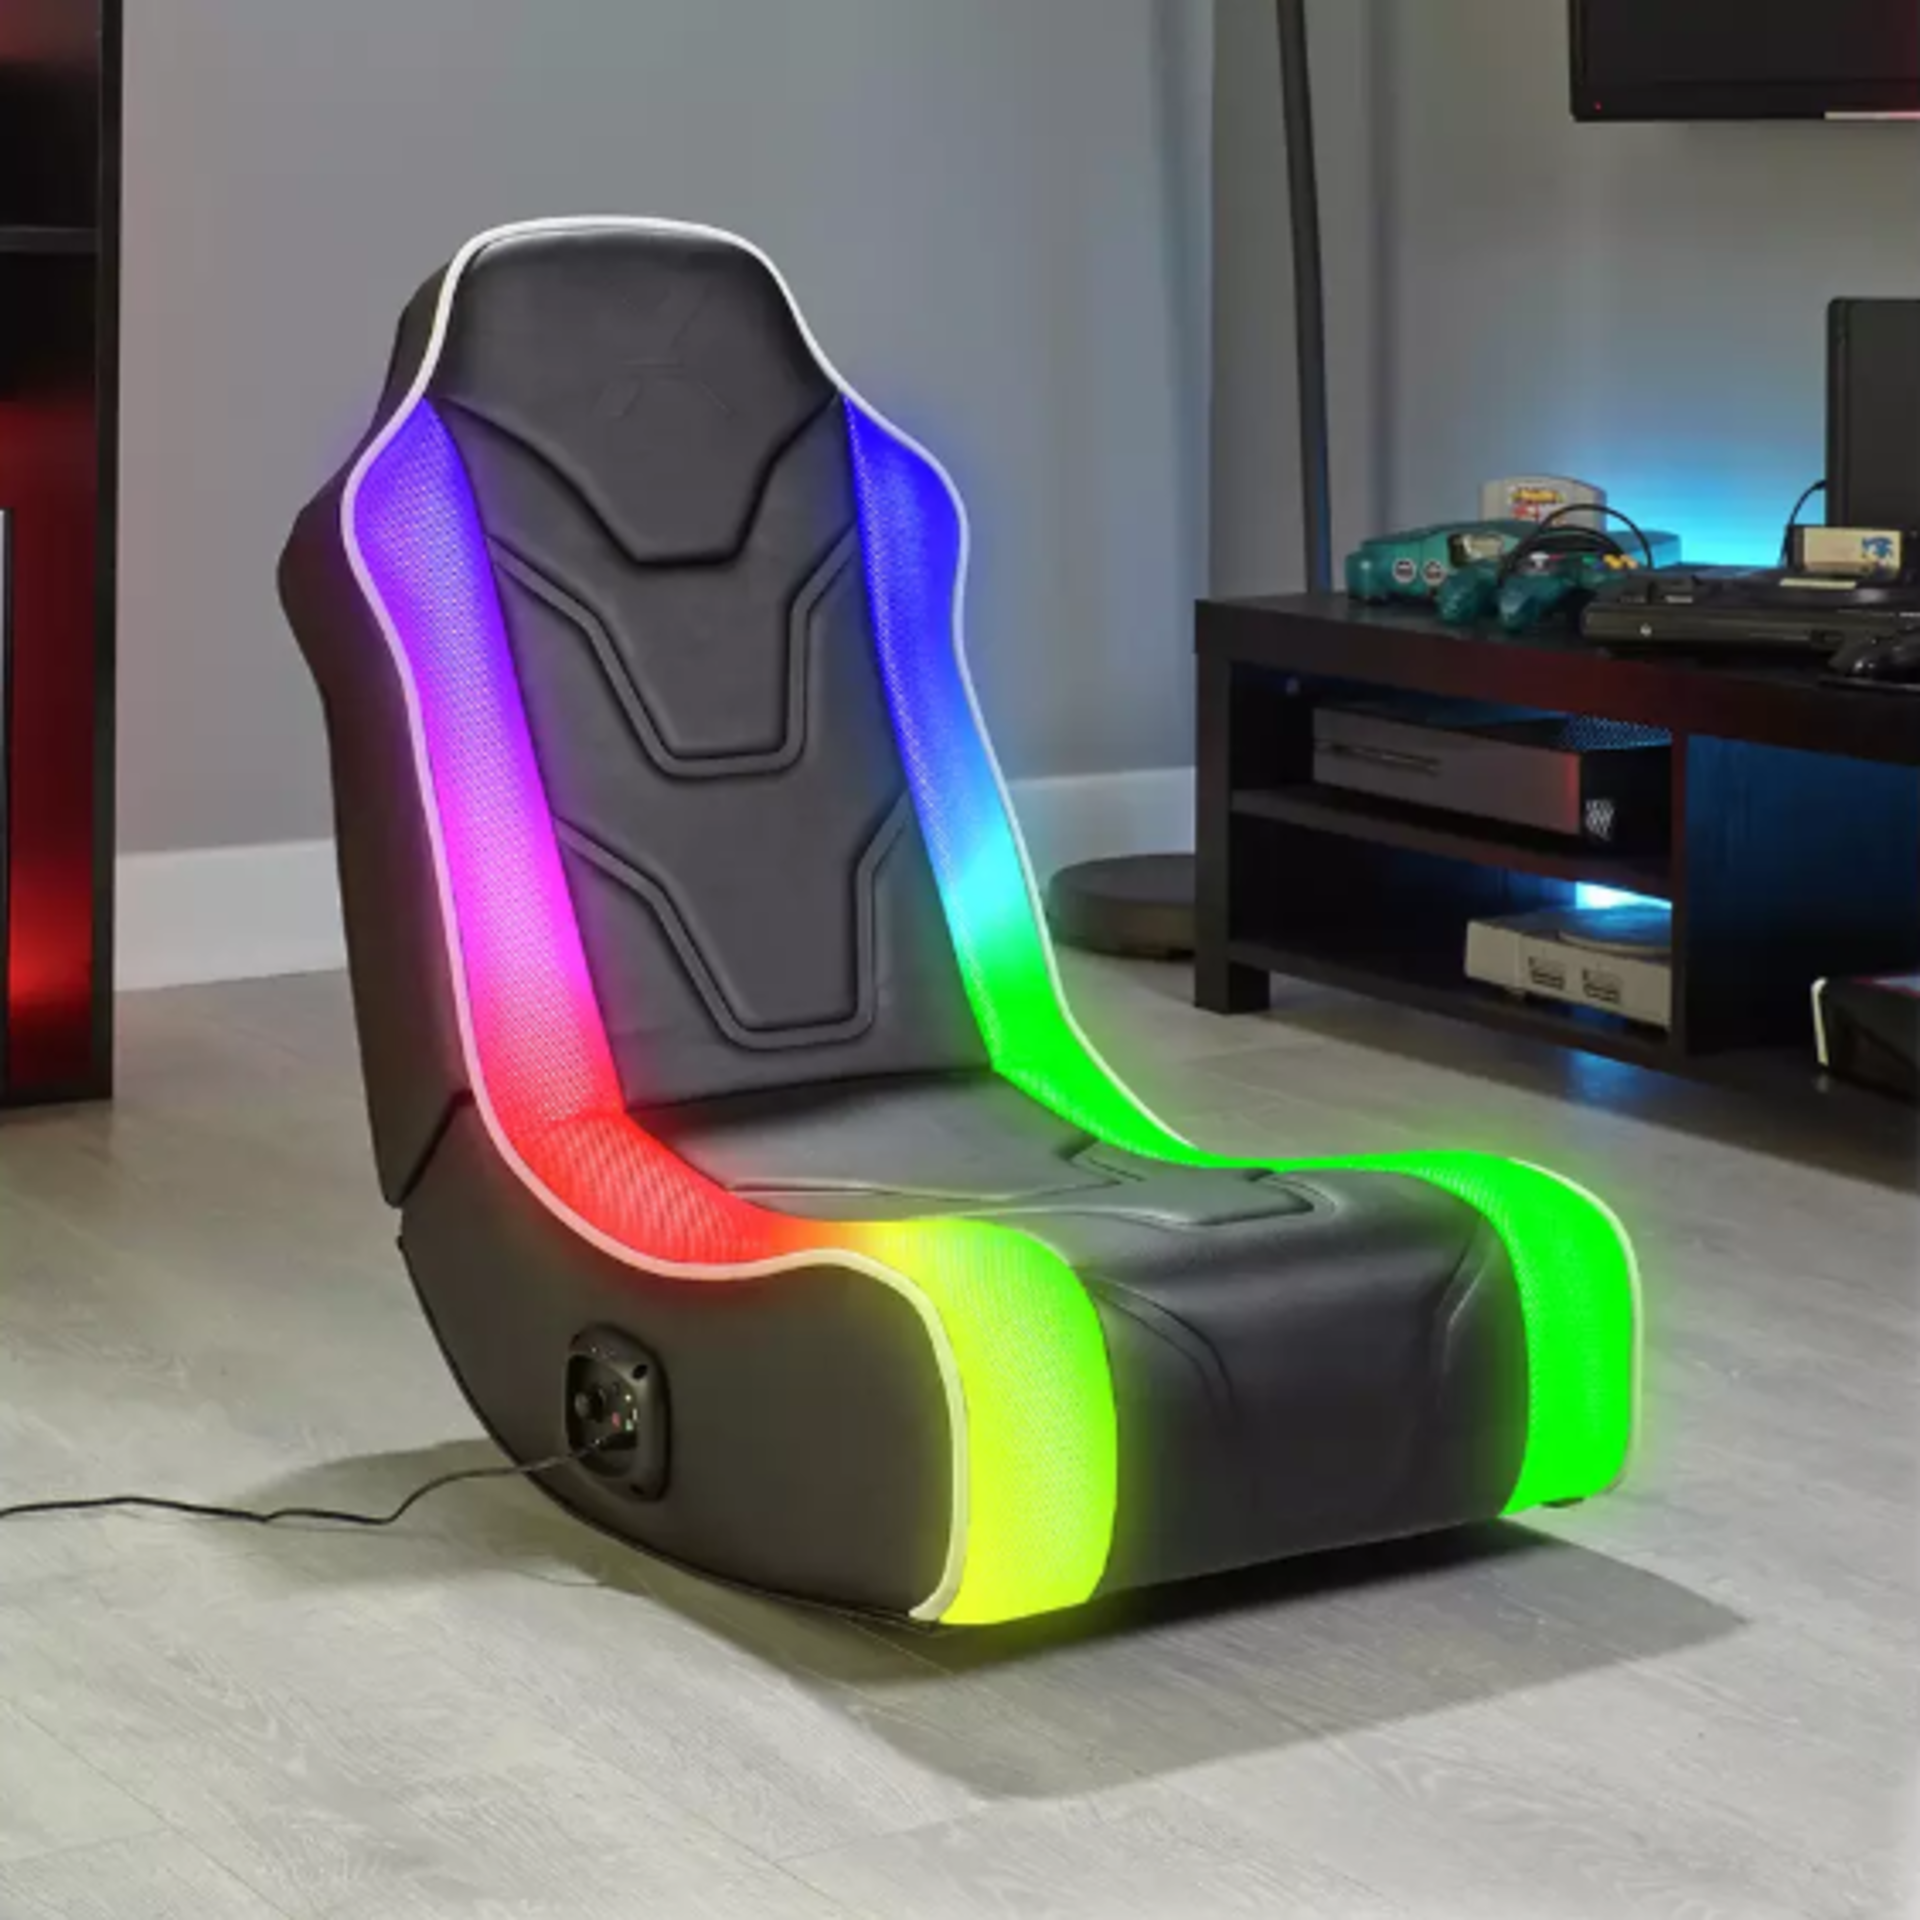 X Rocker Chimera RGB Neo Motion 2.0 Stereo LED Gaming Chair. RRP £129.00. Light up your game room - Image 2 of 2